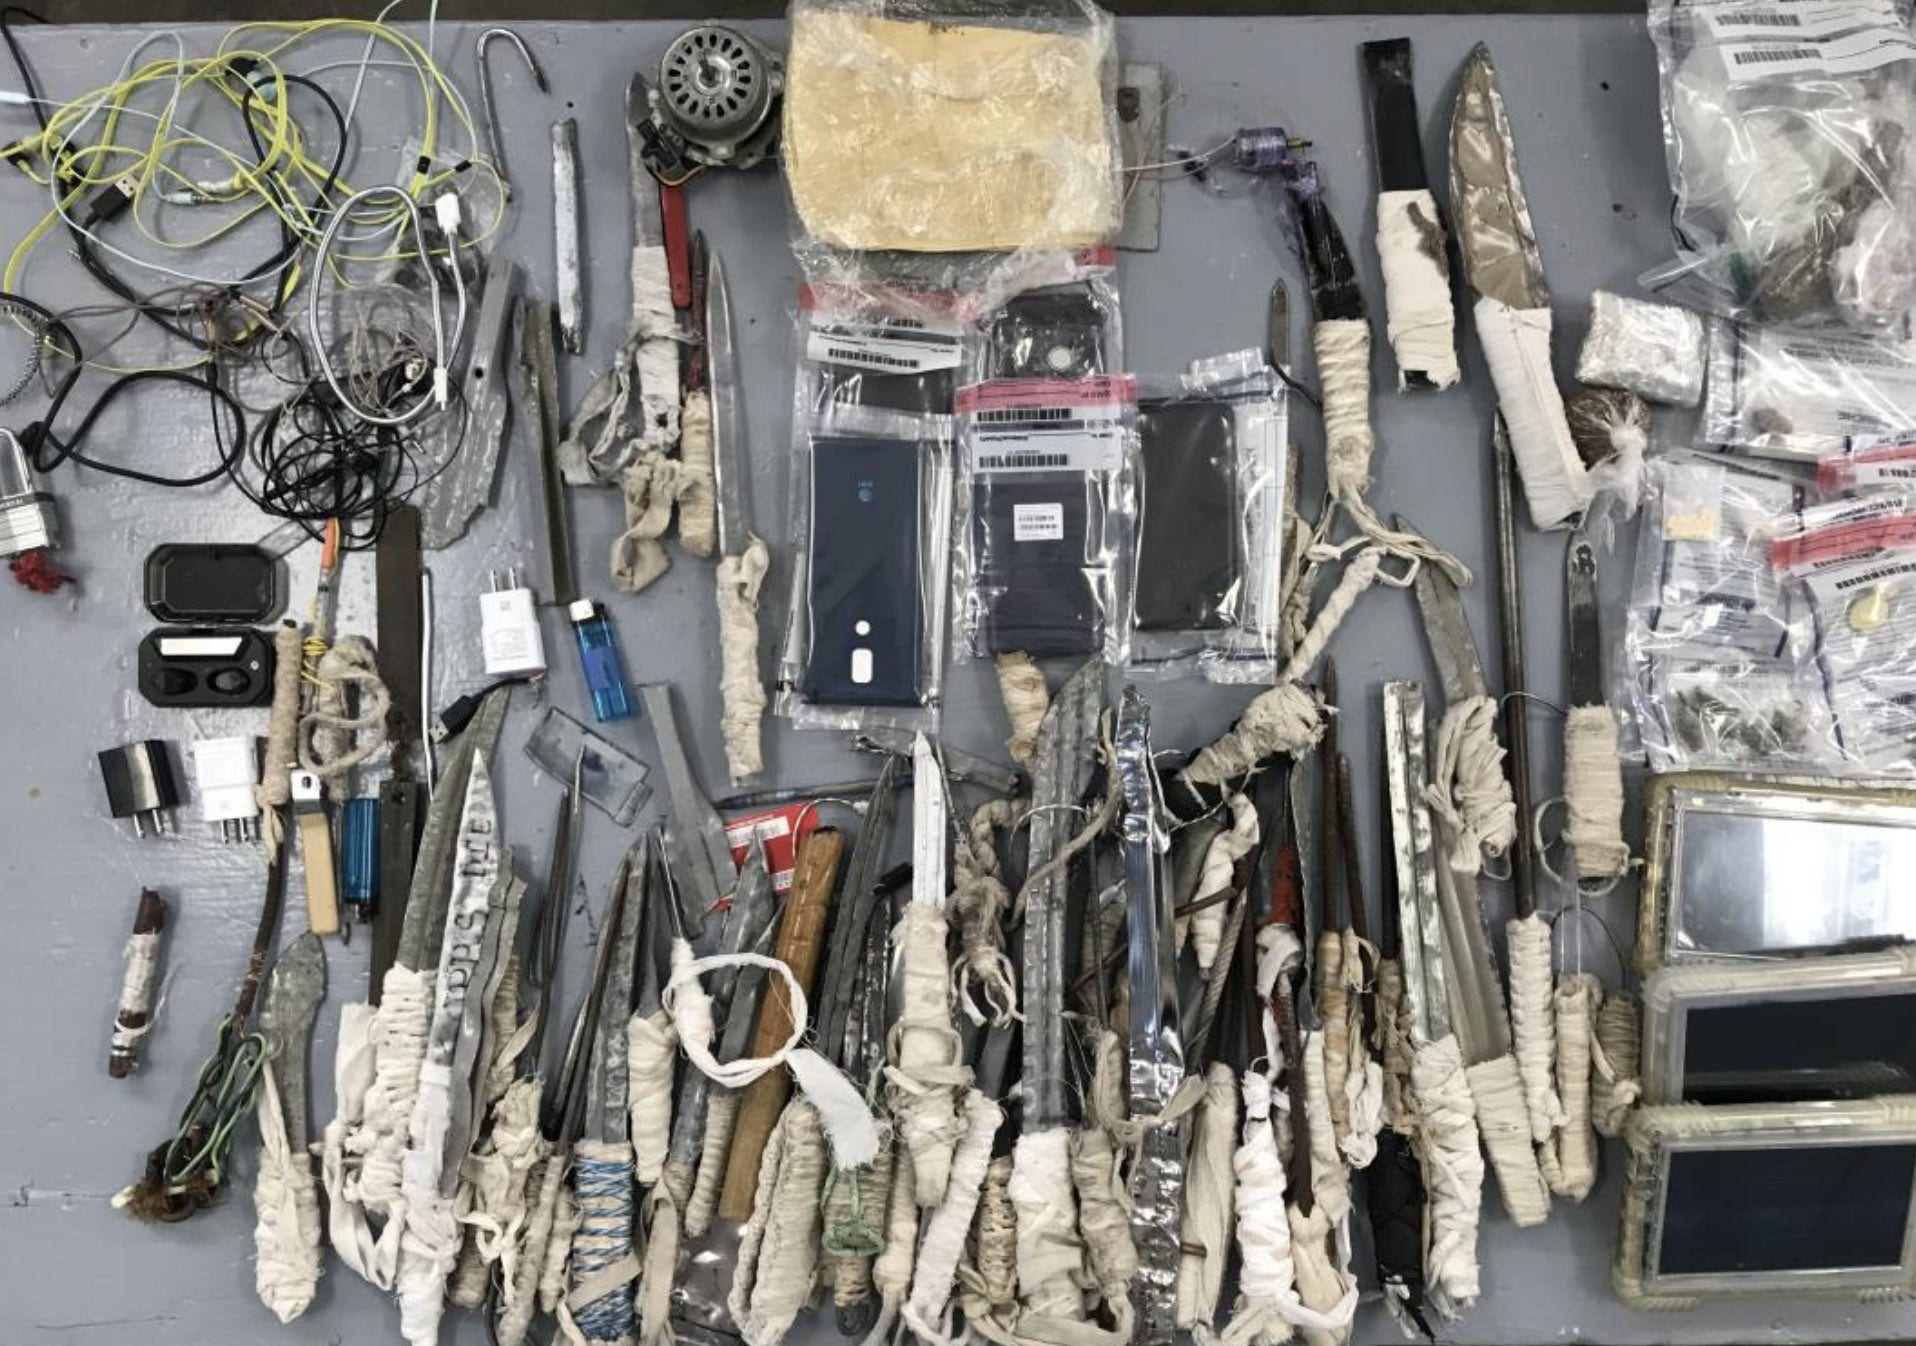 Georgia prisons bust: Authorities seize 1K contraband items, including weapons and meth